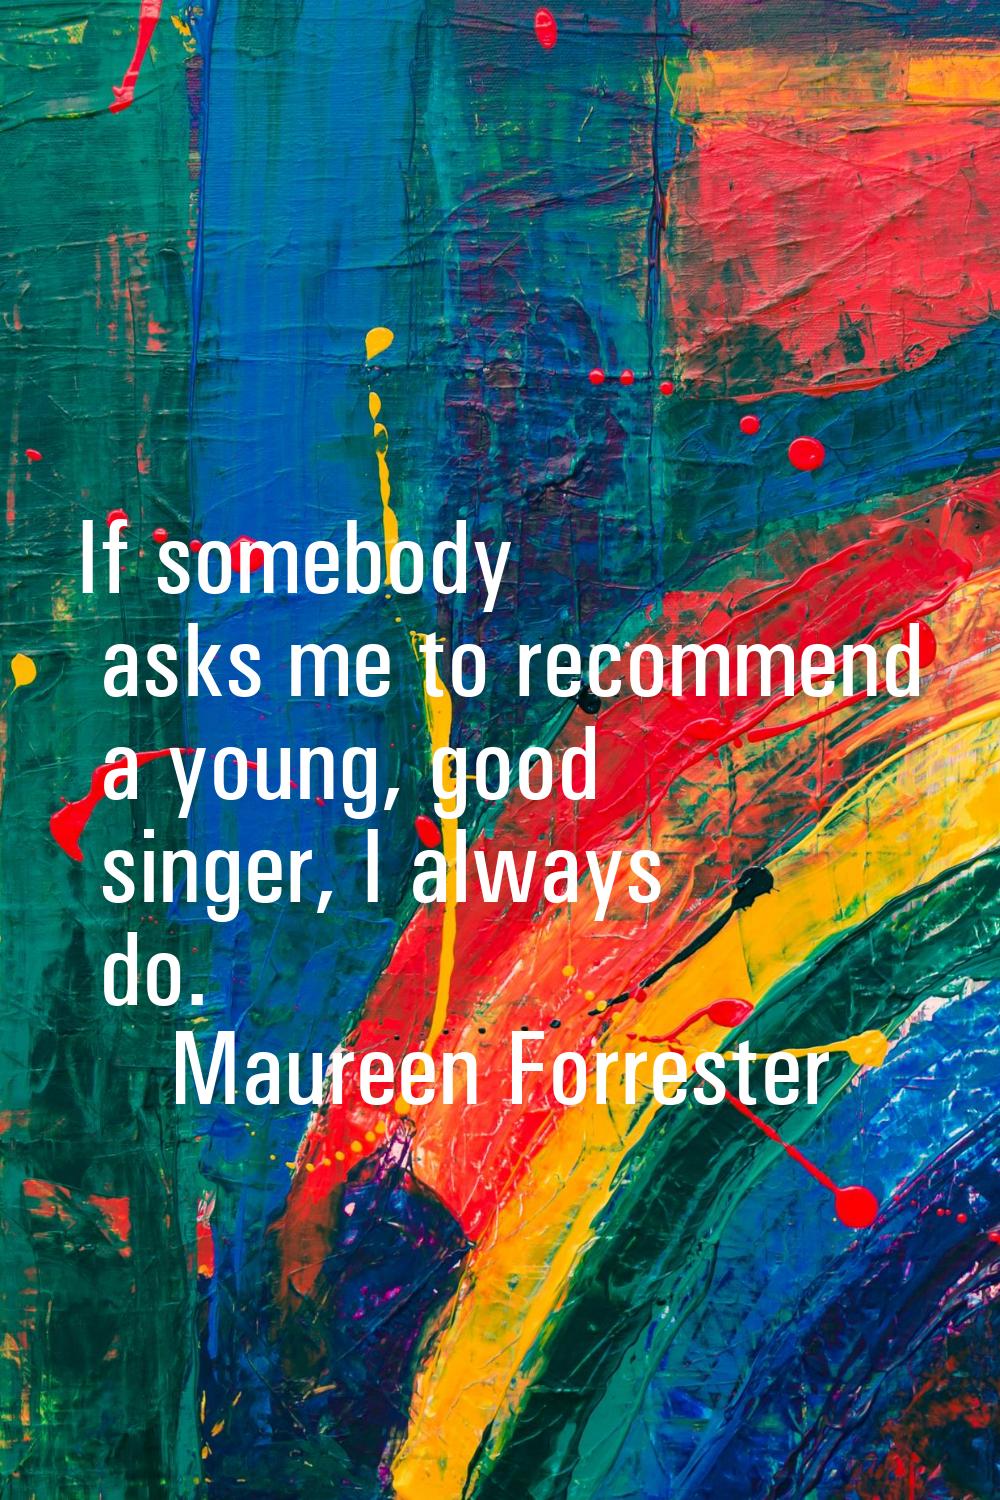 If somebody asks me to recommend a young, good singer, I always do.